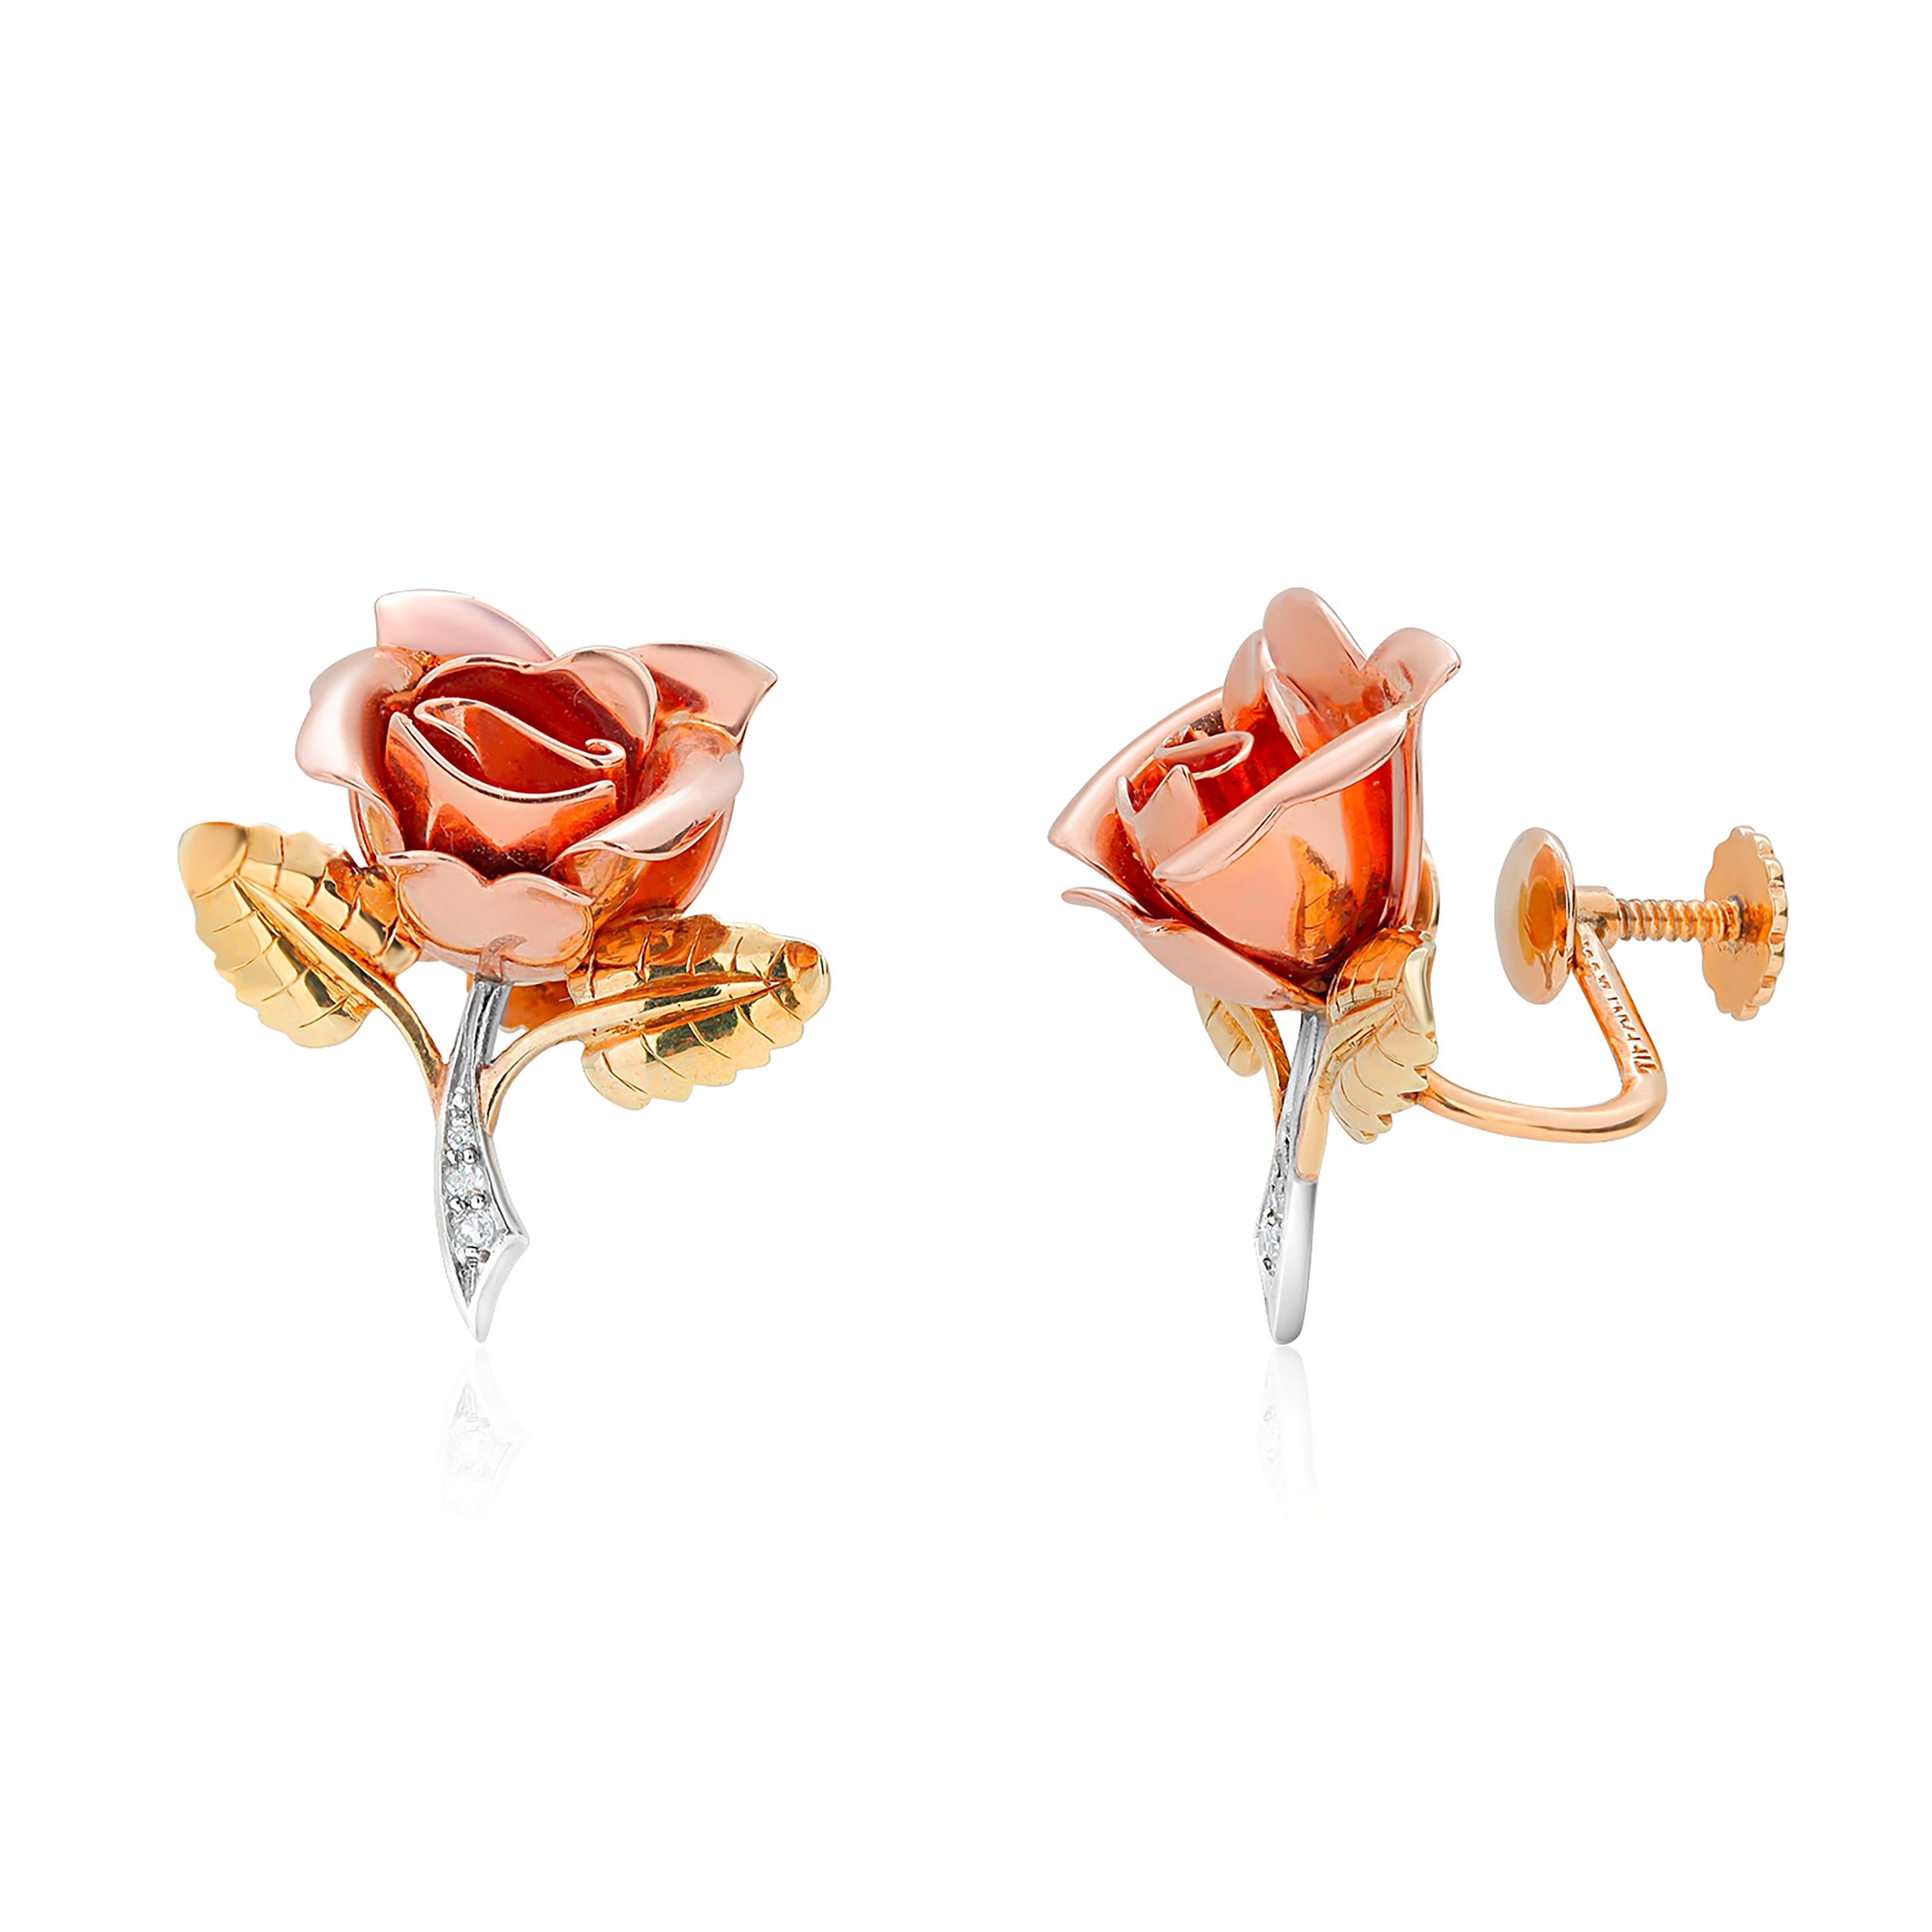 Round Cut Tiffany and Co Circa 1940s Yellow White and Rose Gold Floral Diamond Earrings